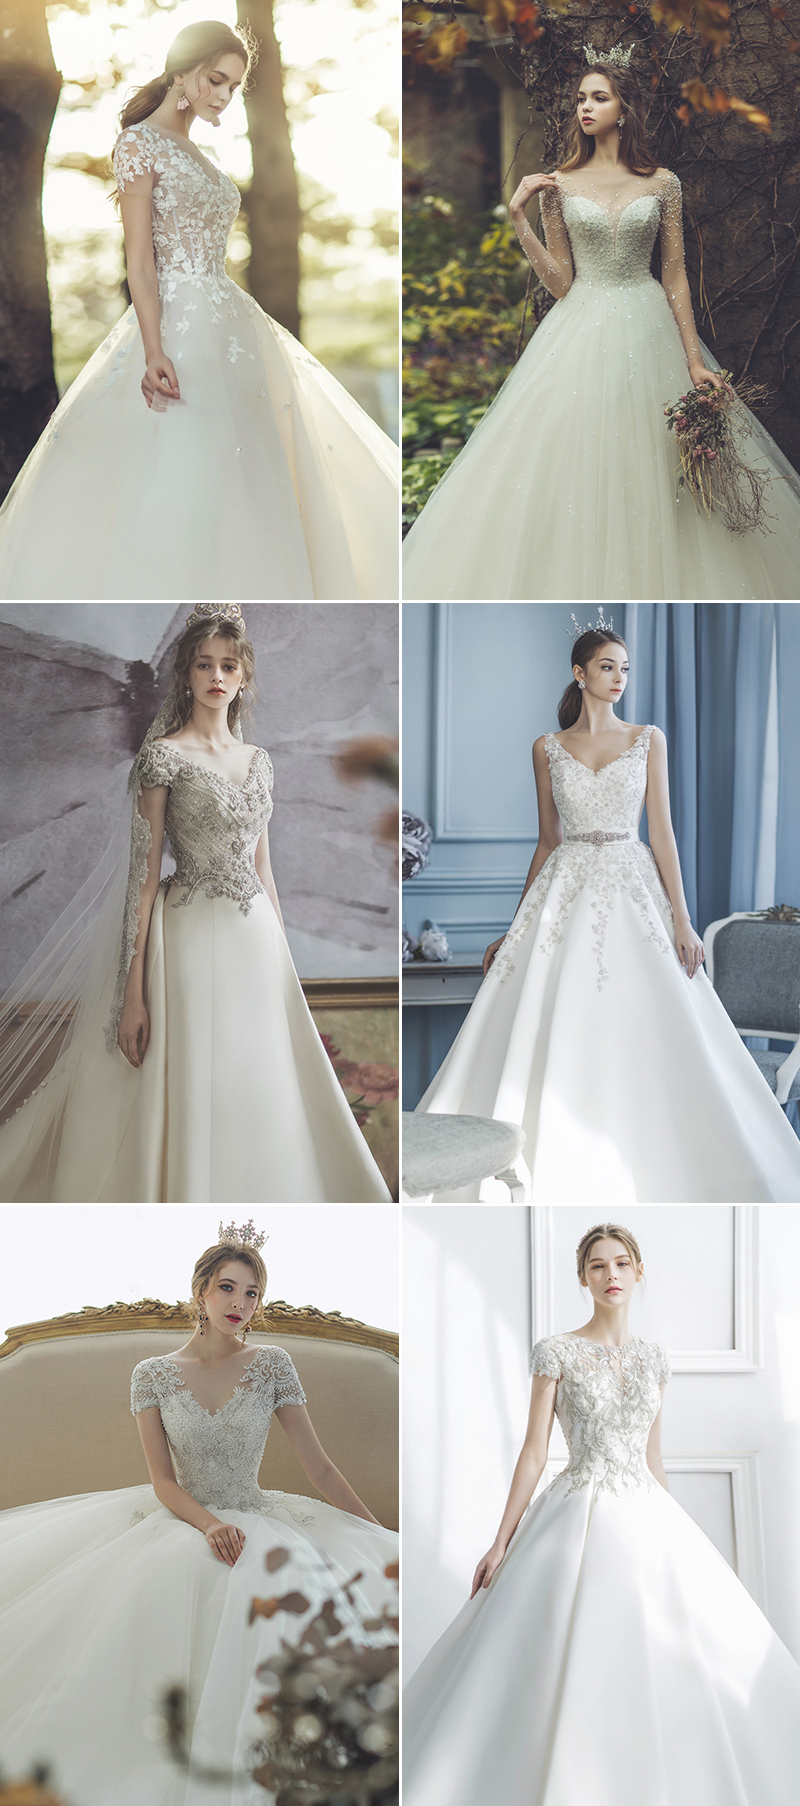 30 Wedding Dresses Featuring a Contemporary Take on Princess Ball